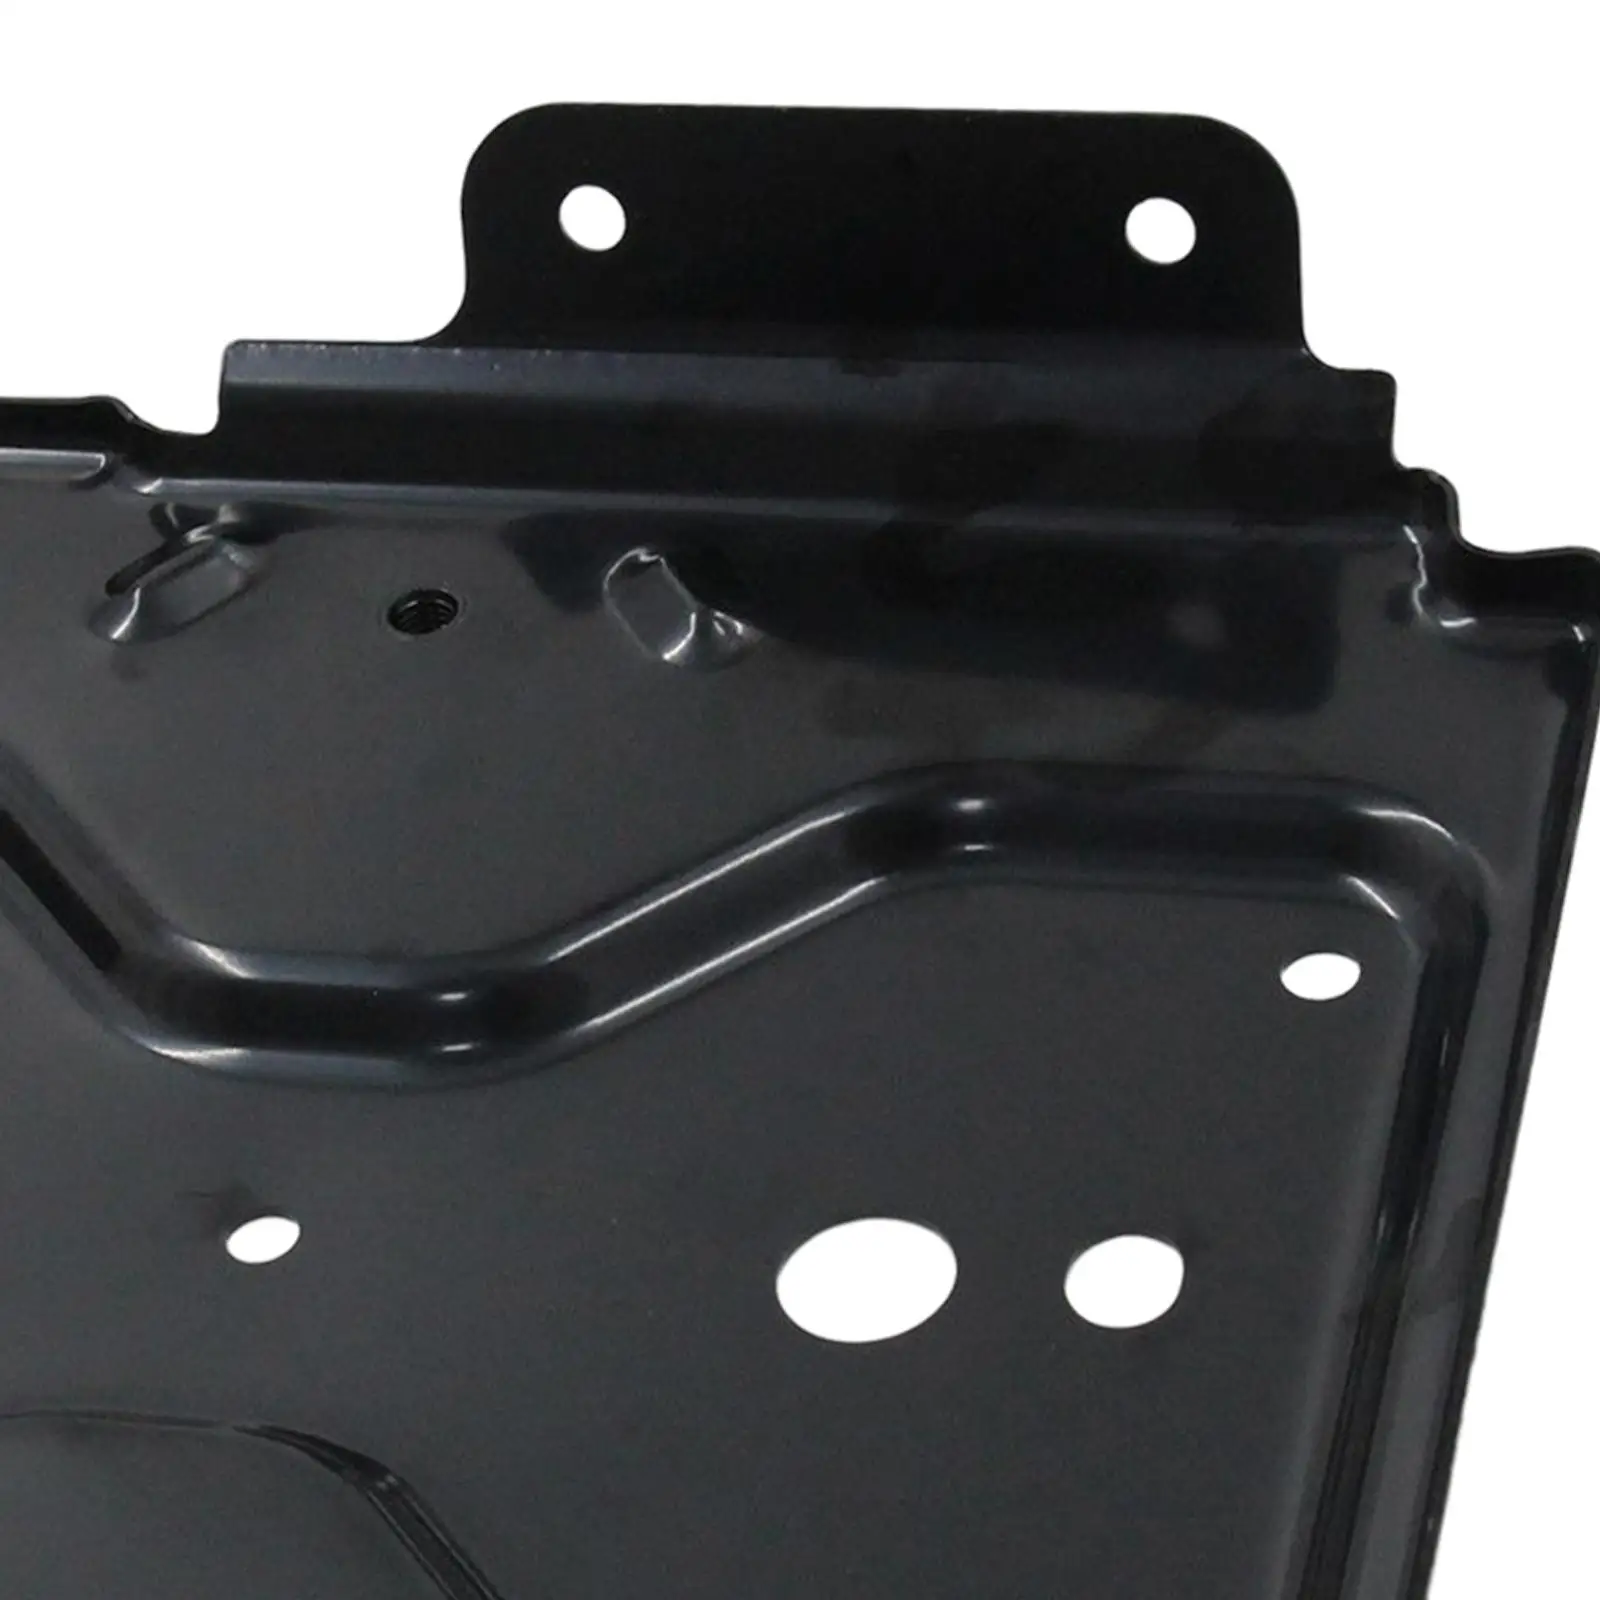 Driver Side Battery Tray Premium Durable High Performance Car Accessories Replaces Spare Parts for Chevrolet Silverado 1500